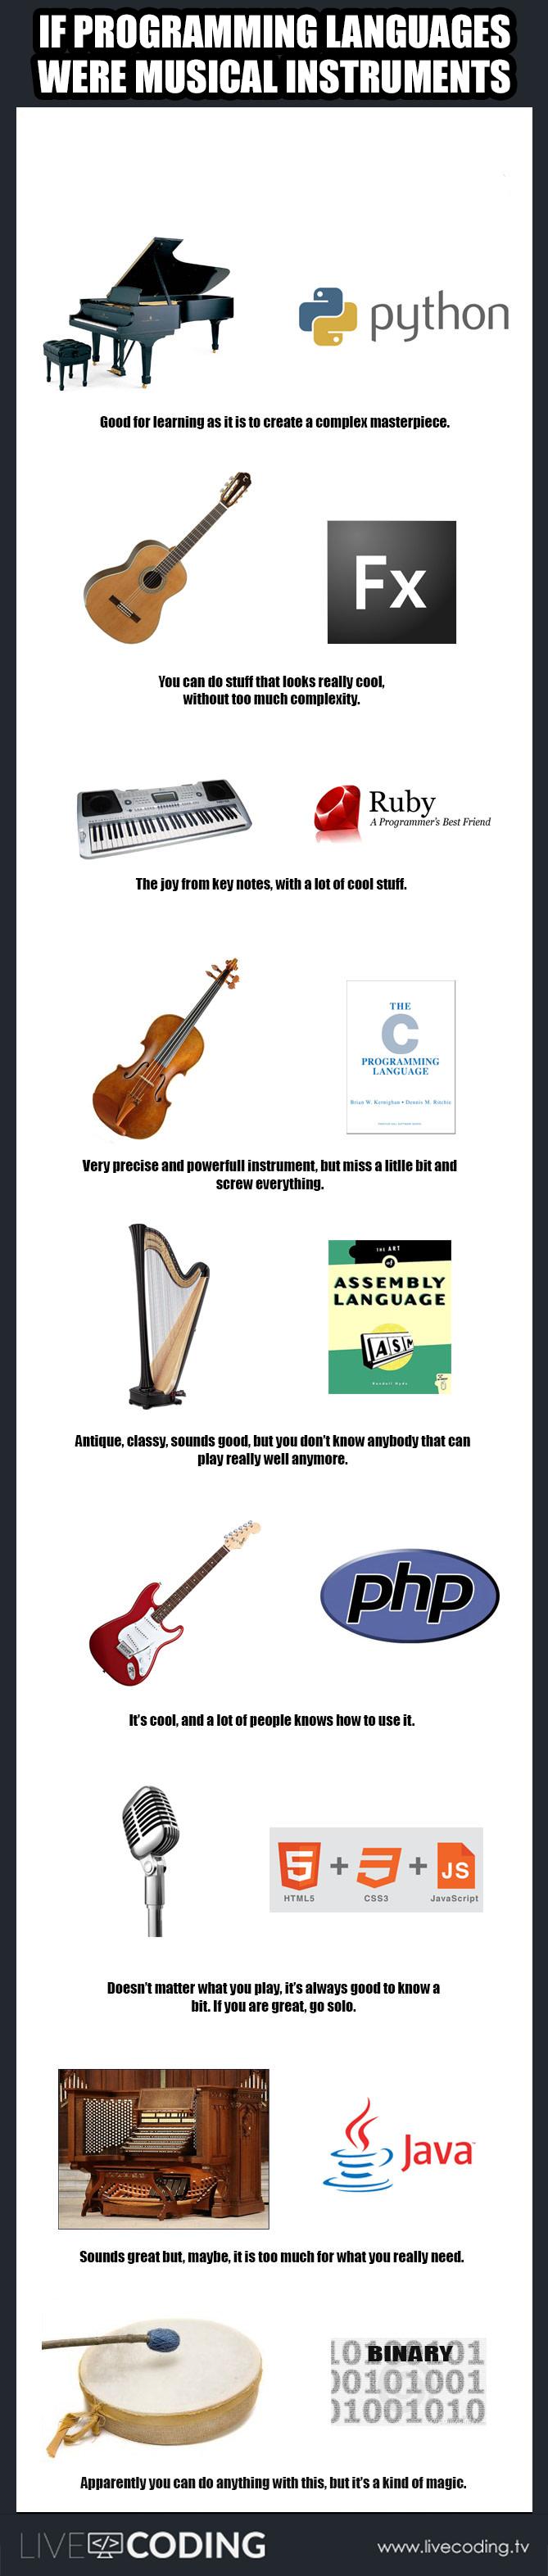 if_programming_languages_were_musical_instruments.jpg